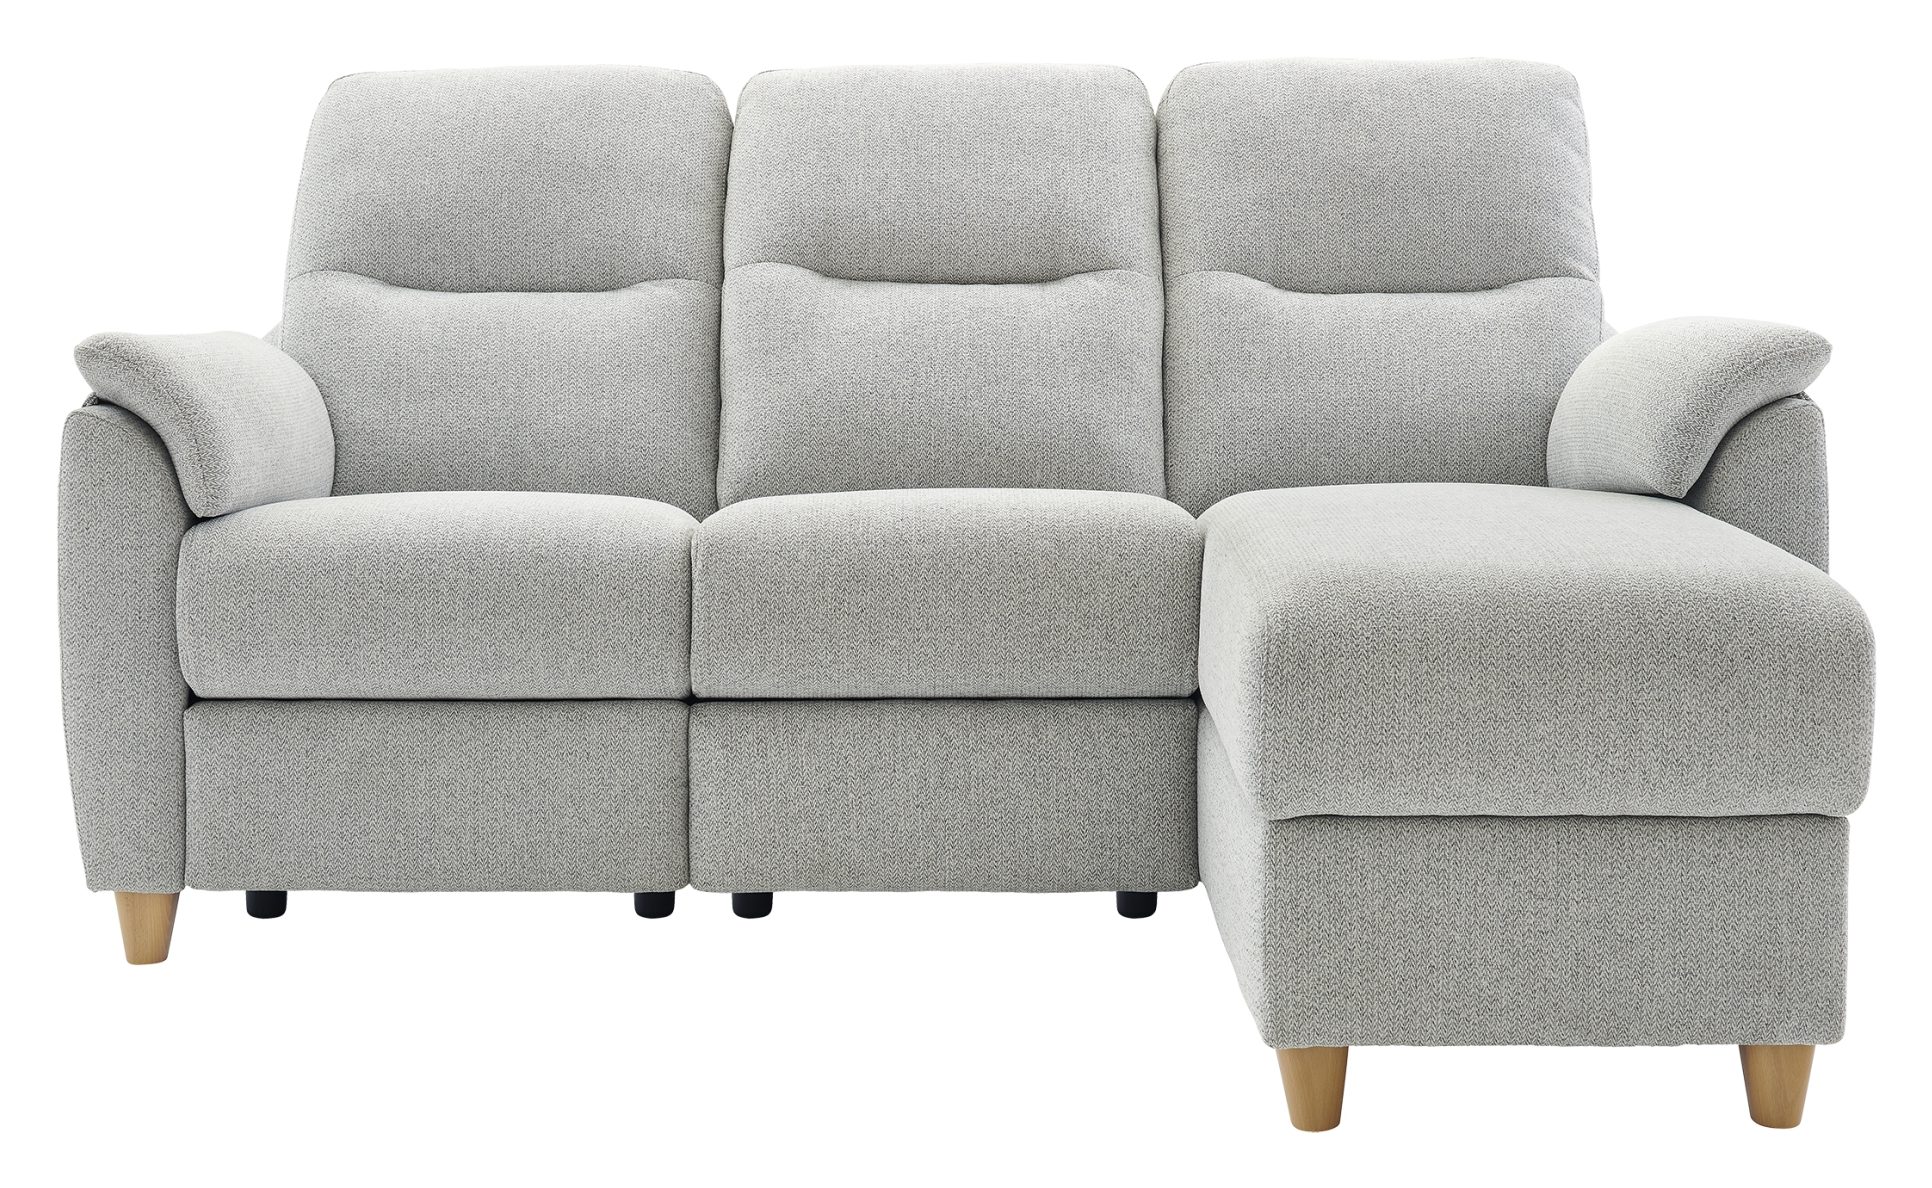 spencer chaise sofa bed